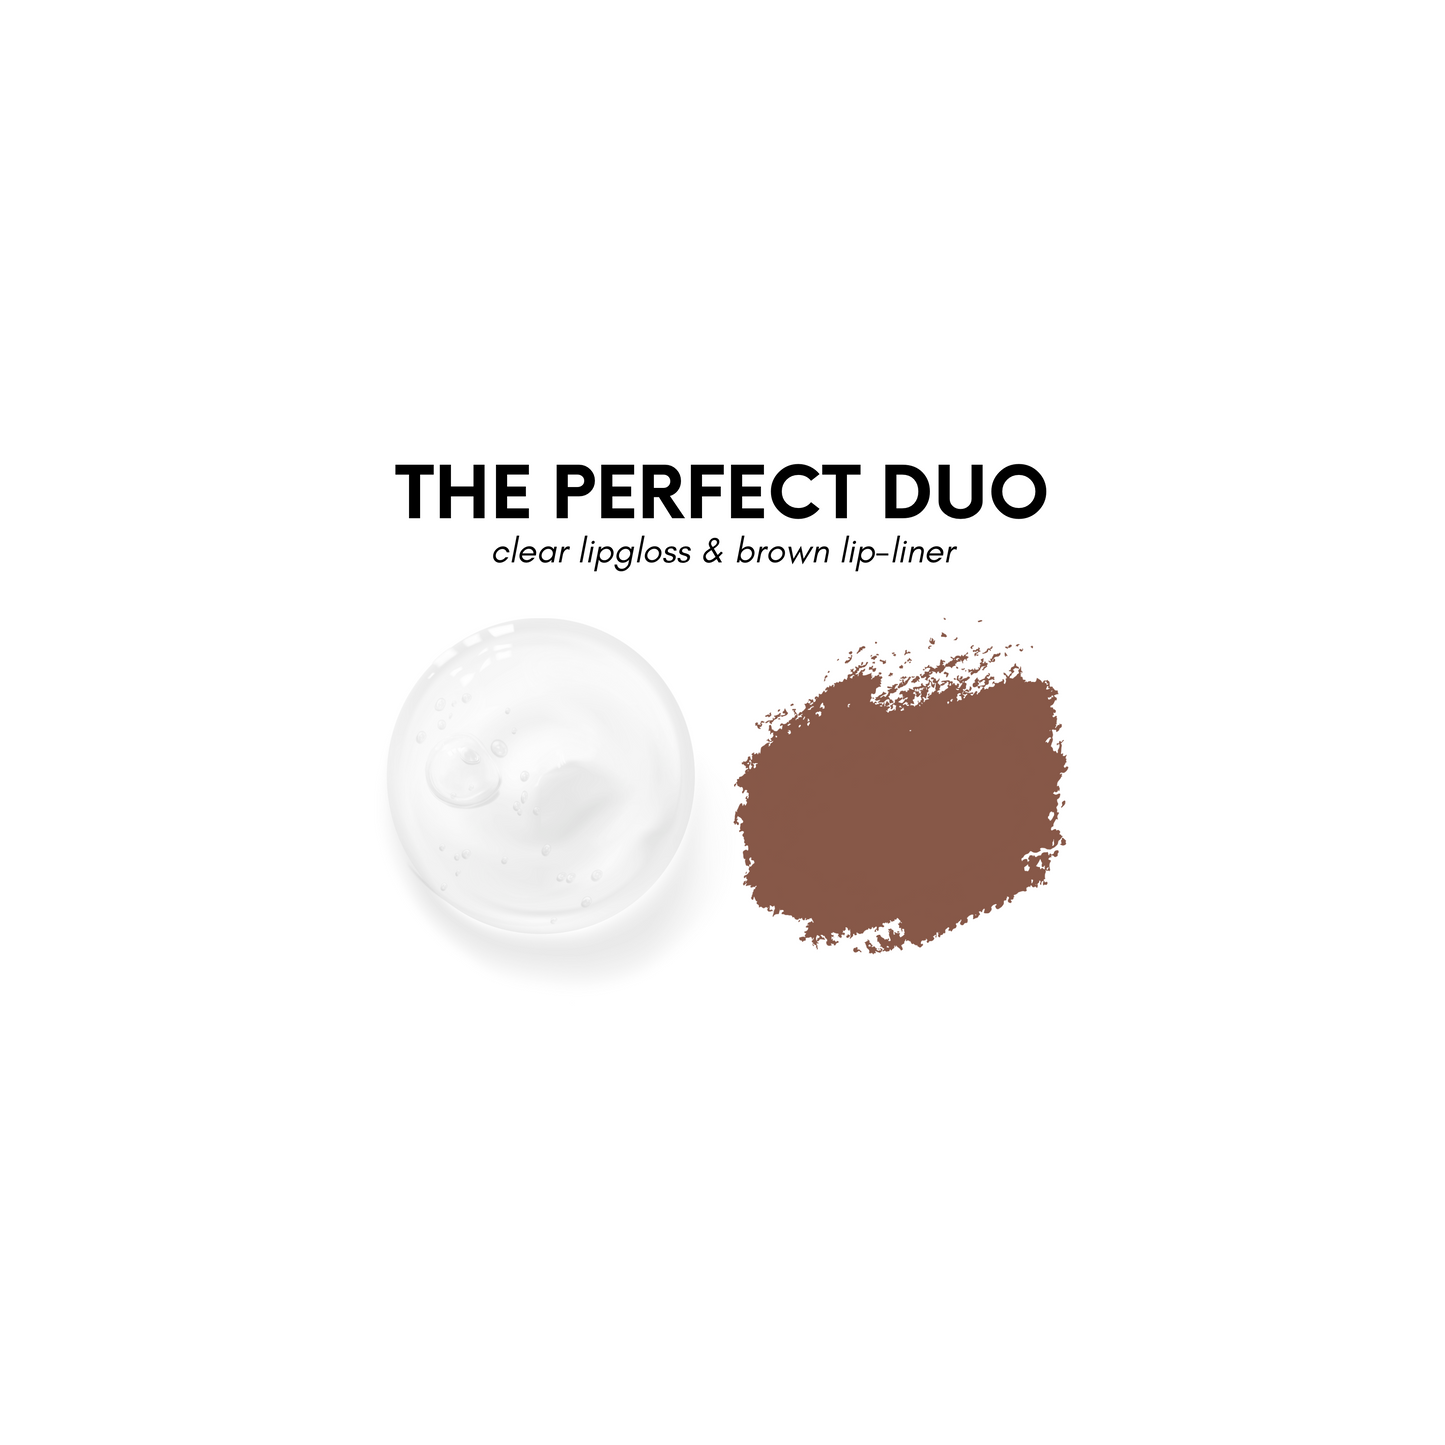 The Perfect Duo